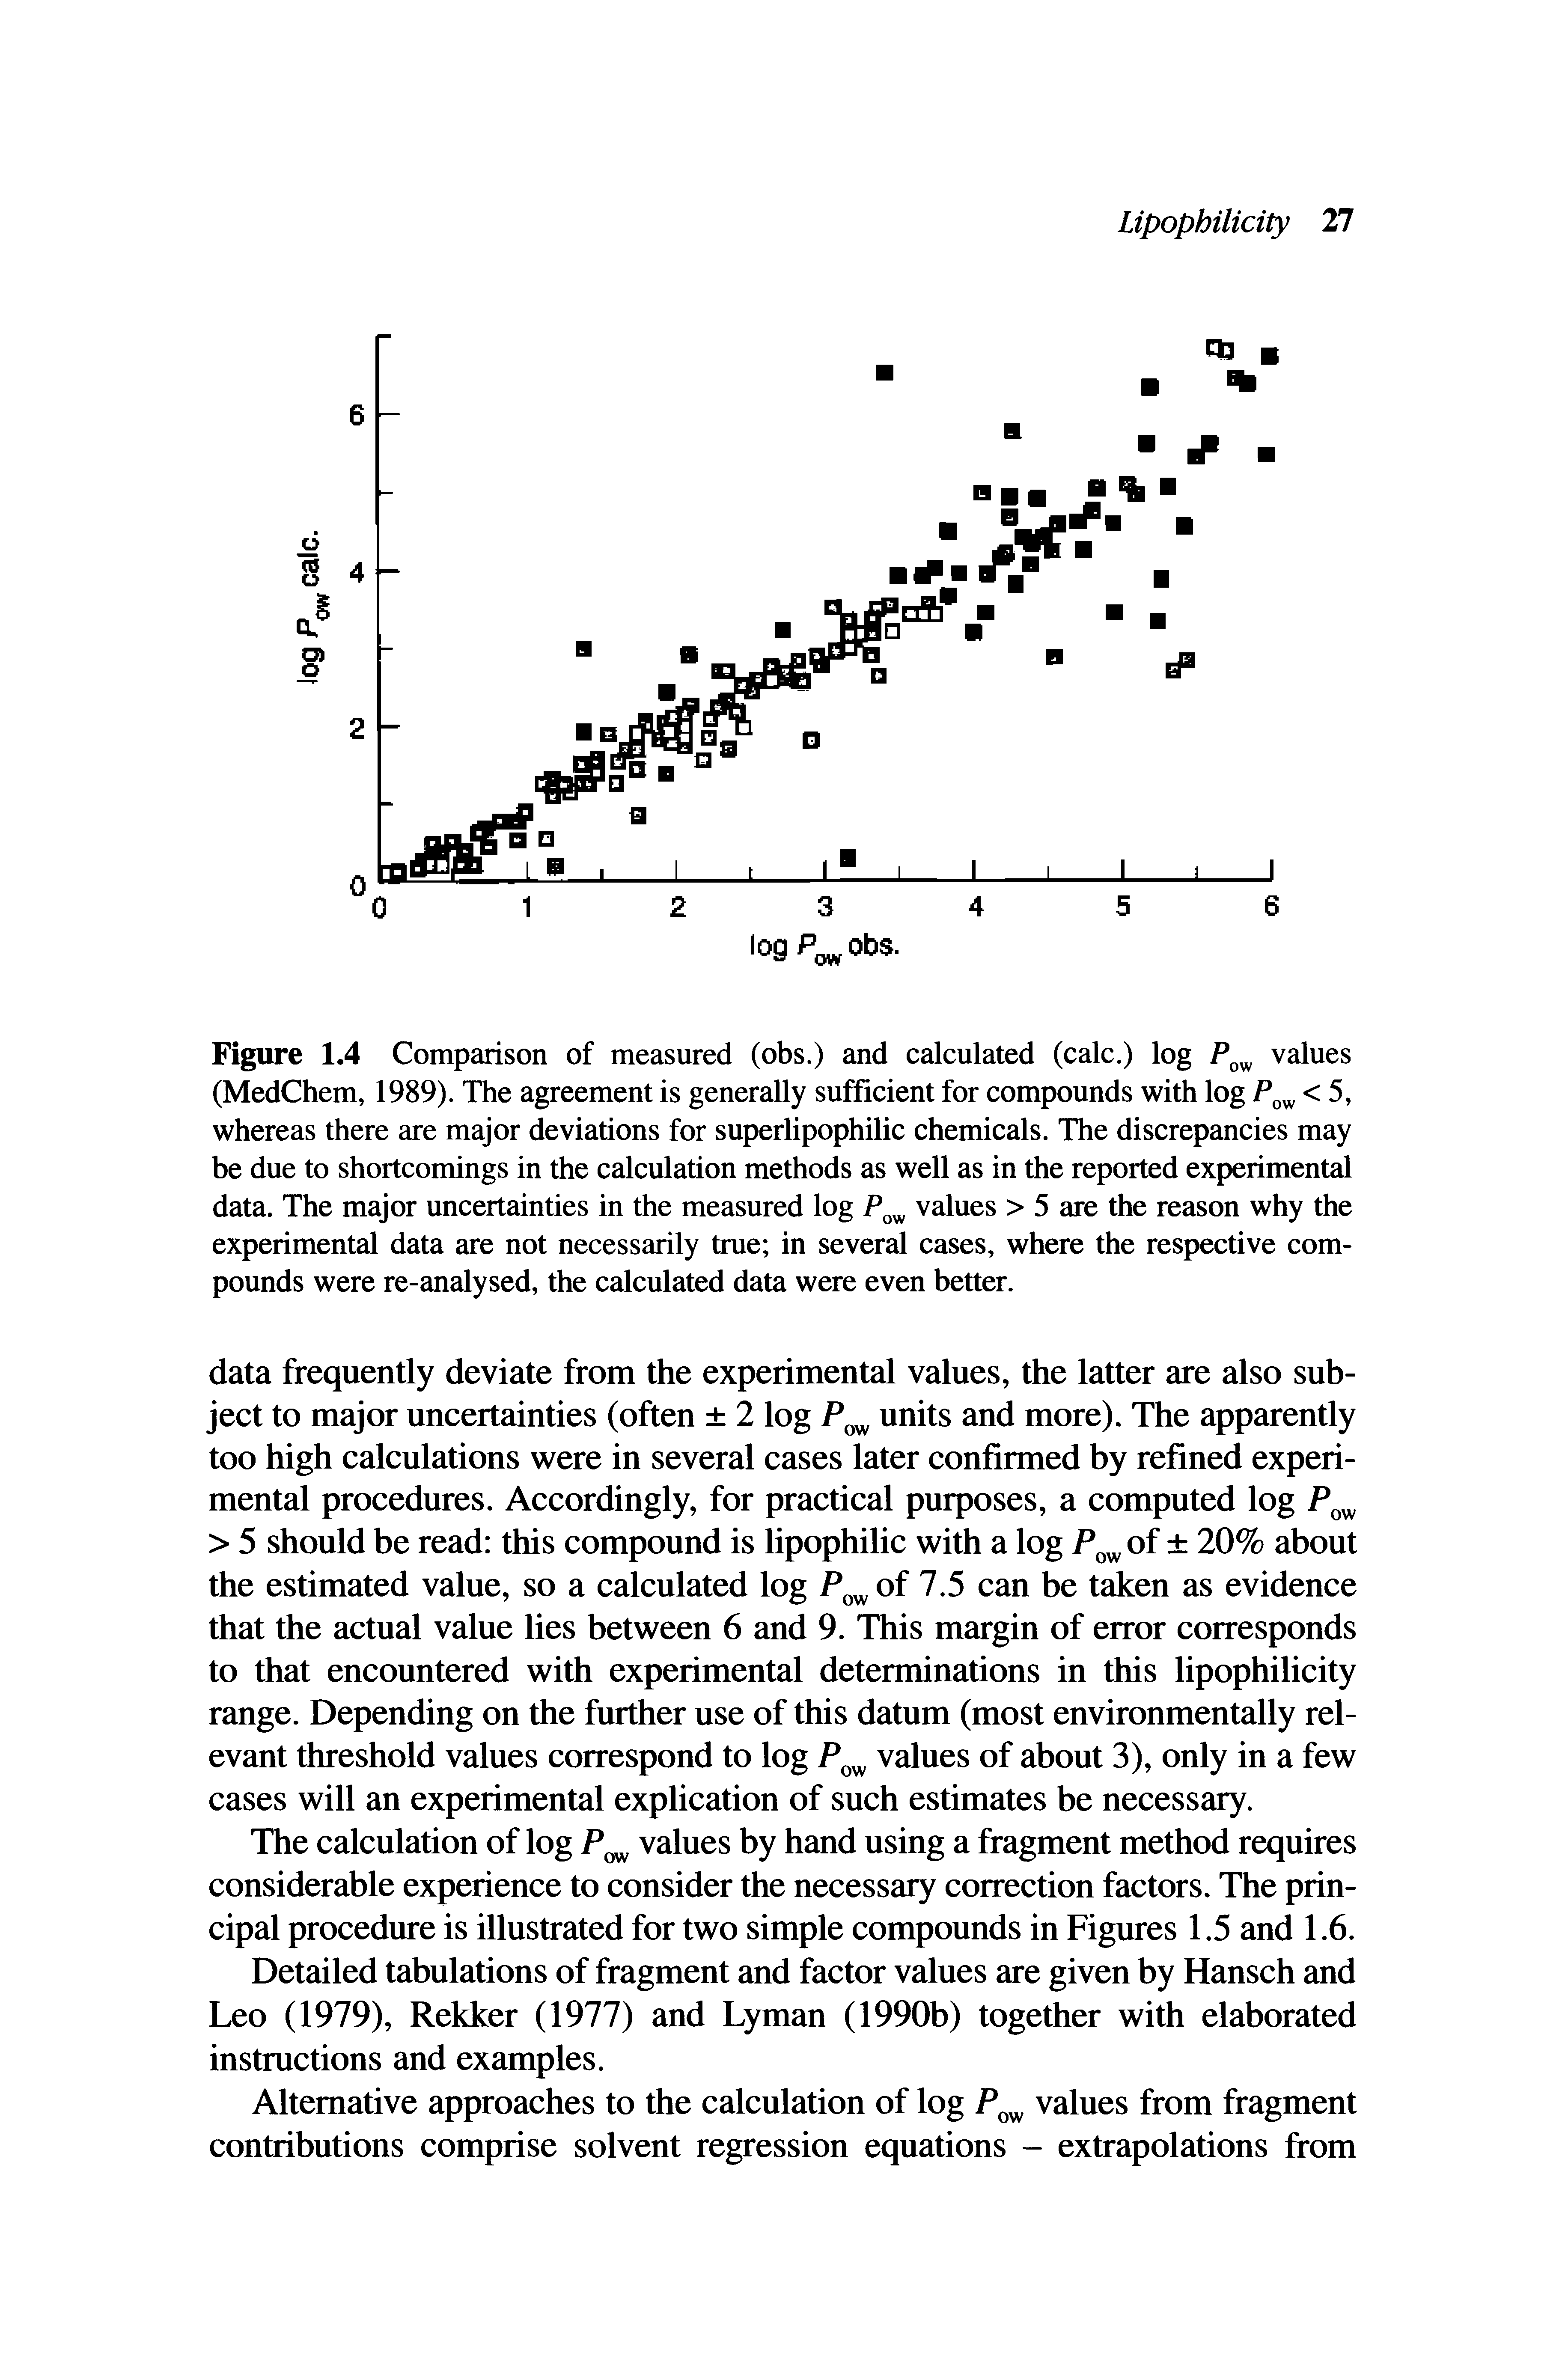 Figure 1.4 Comparison of measured (obs.) and calculated (calc.) log values (MedChem, 1989). The agreement is generally sufficient for compounds with log < 5, whereas there are major deviations for superlipophilic chemicals. The discrepancies may be due to shortcomings in the calculation methods as well as in the reported experimental data. The major uncertainties in the measured log P values > 5 are the reason why the experimental data are not necessarily true in several cases, where the respective compounds were re-analysed, the calculated data were even better.